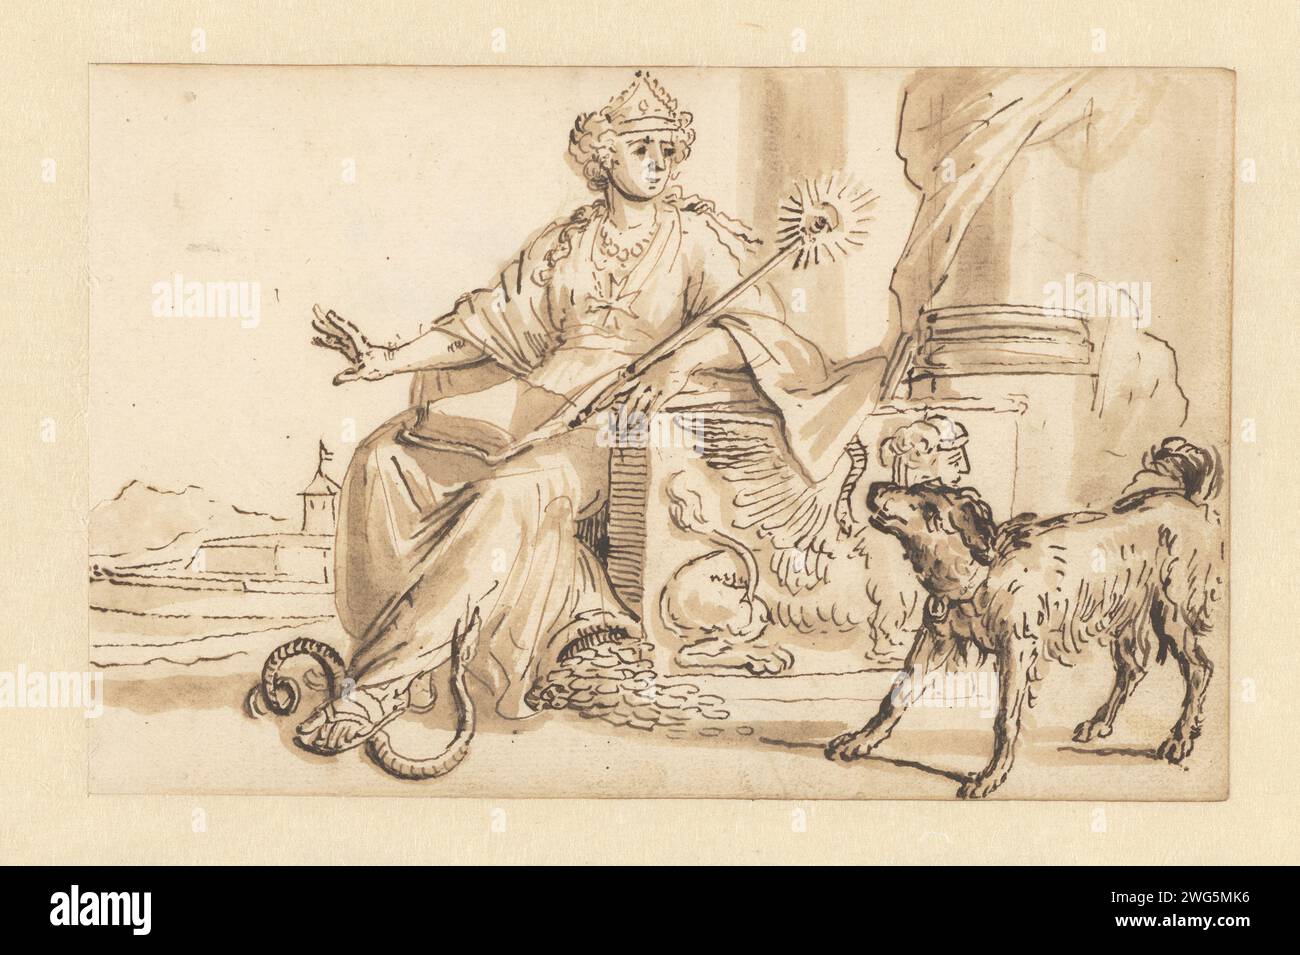 De caution, Romeyn de Hooghe (Possible), 1655 - 1708 drawing   paper. ink pen / brush dog. Prudence, 'Prudentia'; 'Prudenza' (Ripa)  one of the Four Cardinal Virtues Stock Photo